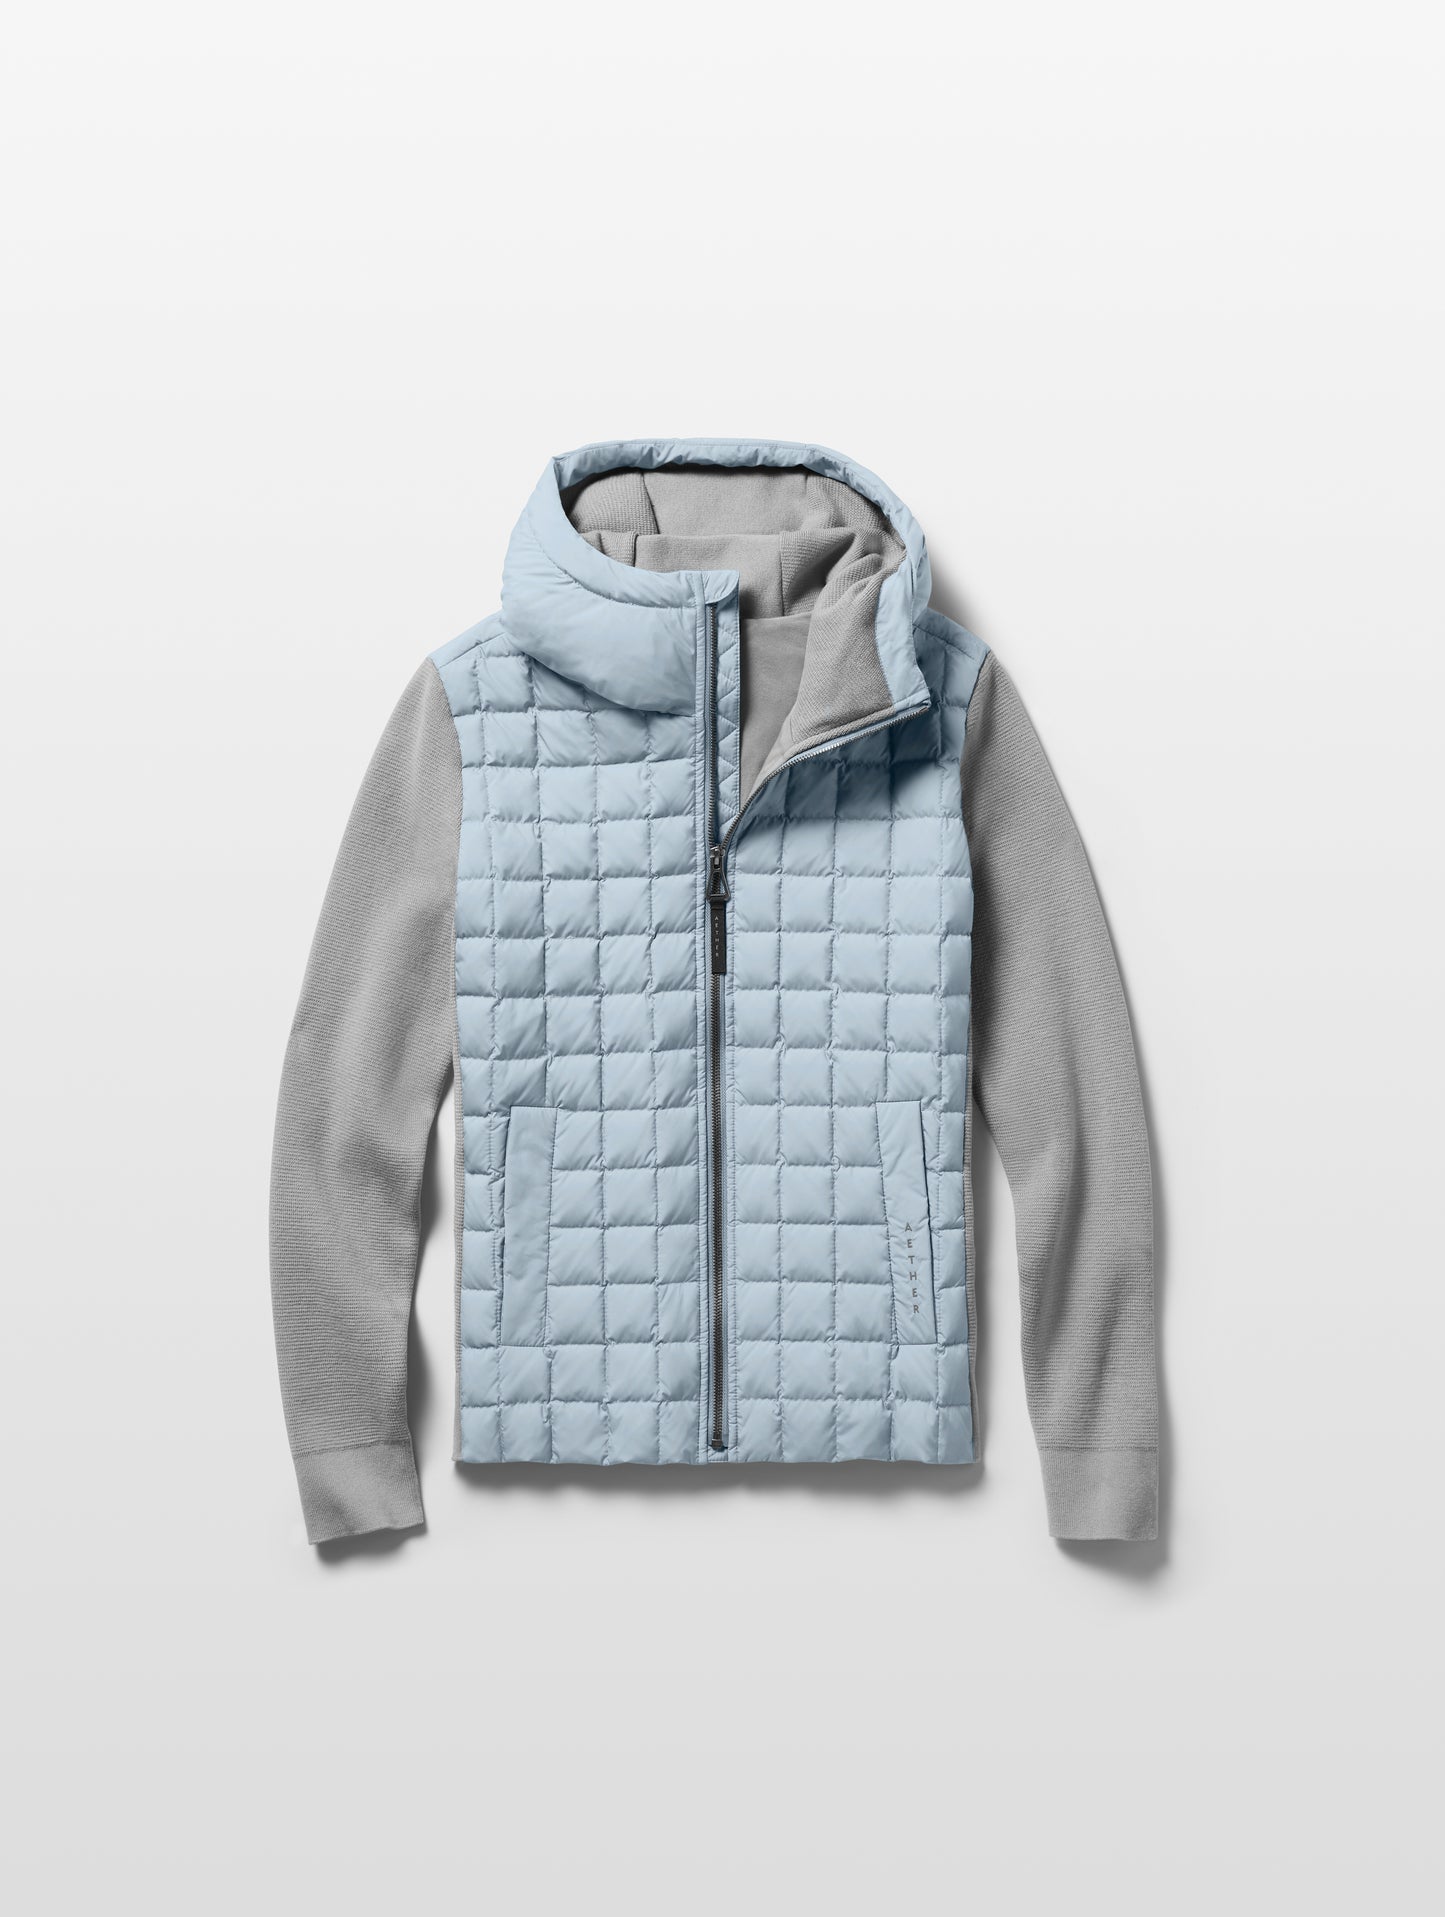 light blue and grey insulated sweater from AETHER Apparel